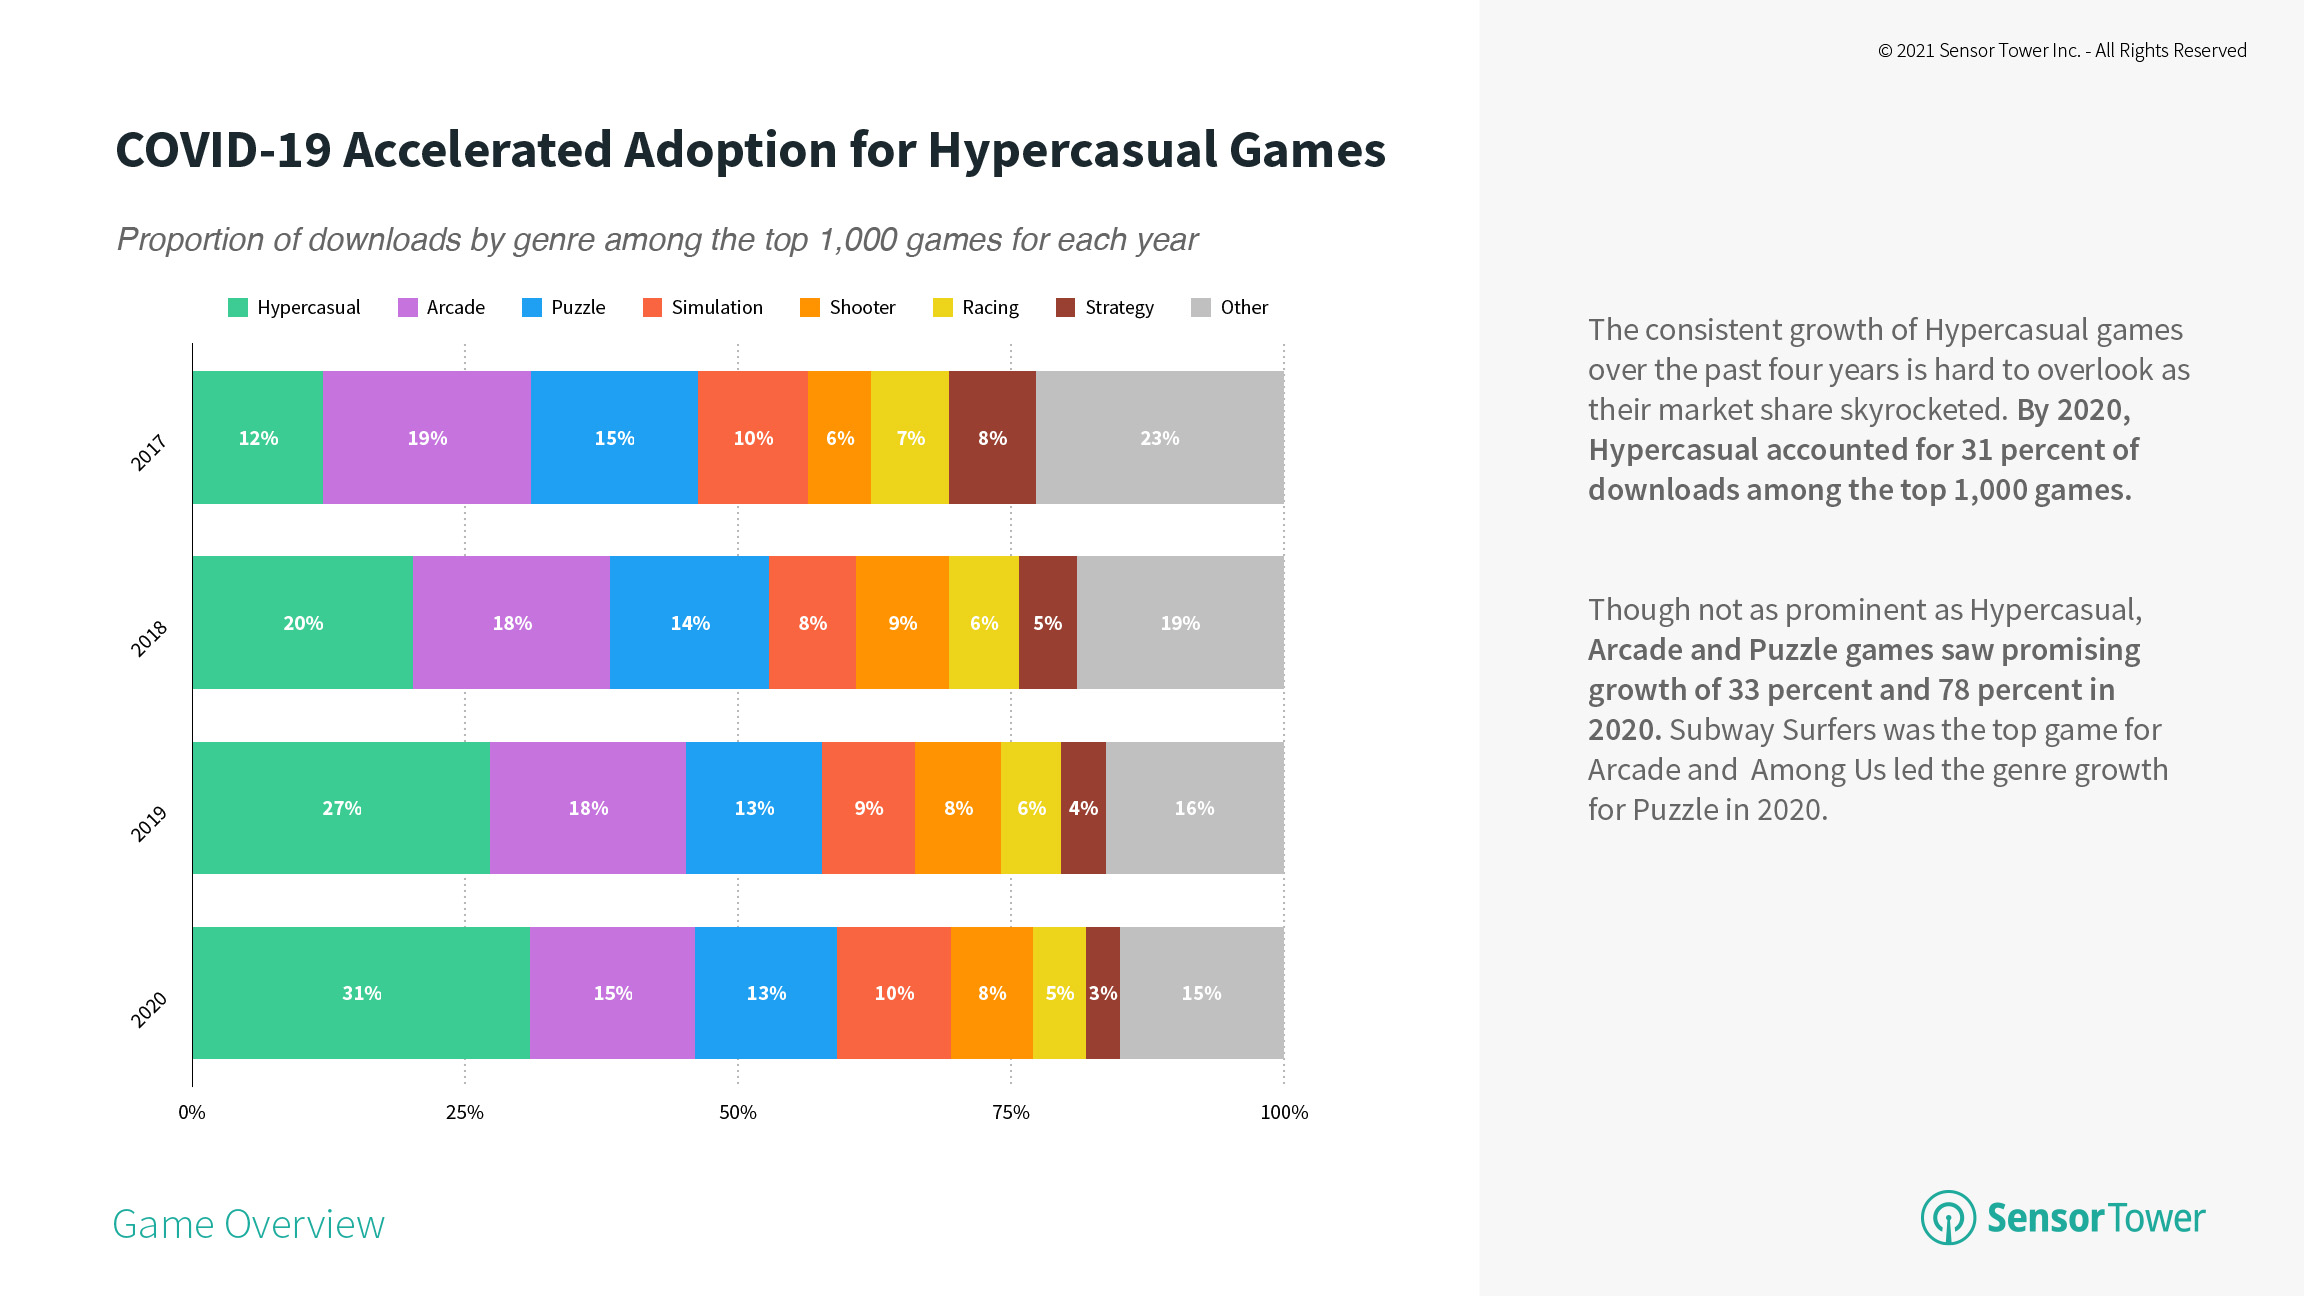 COVID-19 Accelerated Adoption for Hypercasual Games